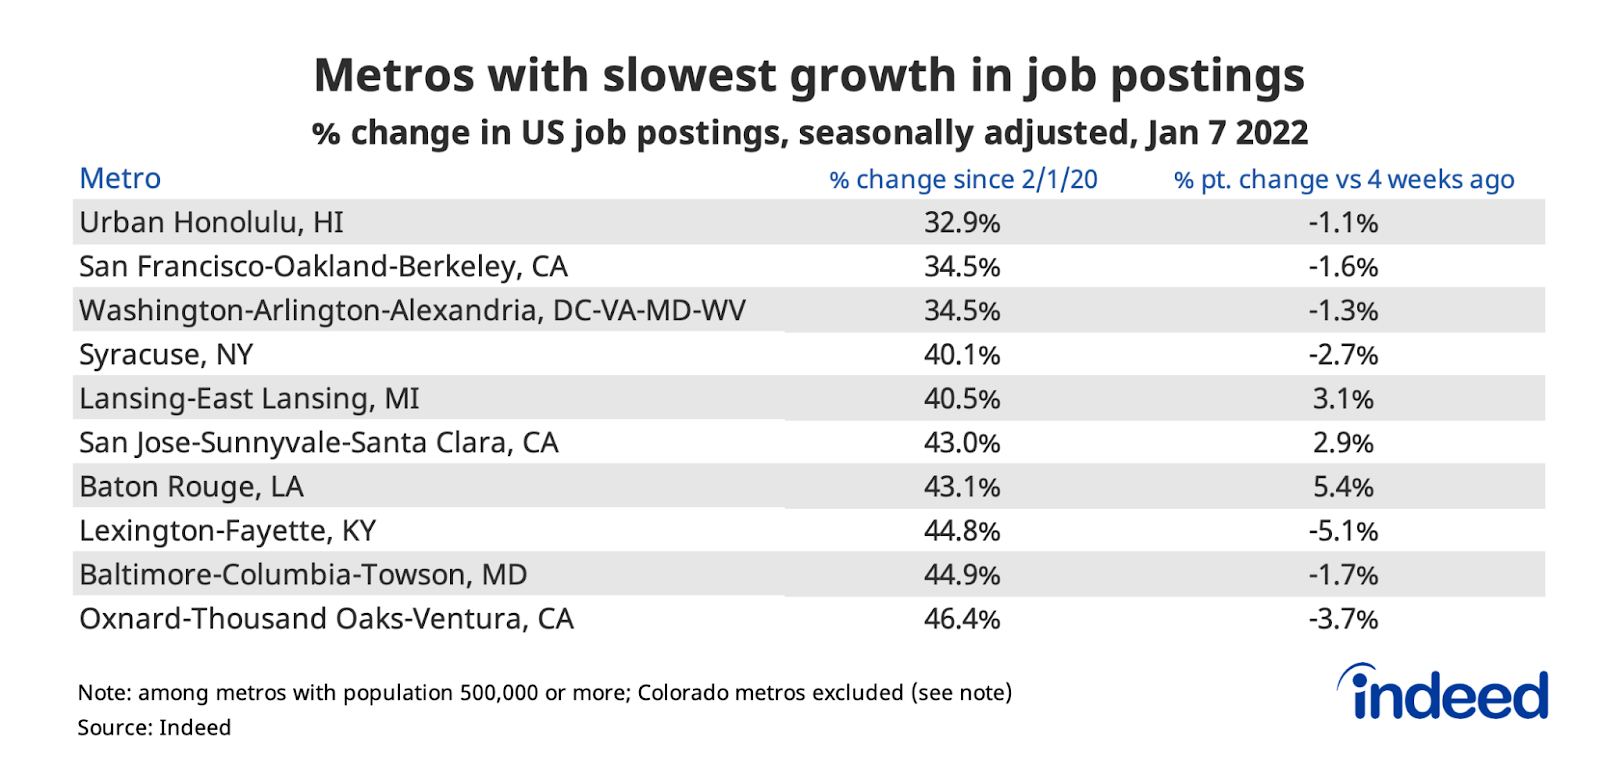 Table titled “Metros with slowest growth in job postings.”